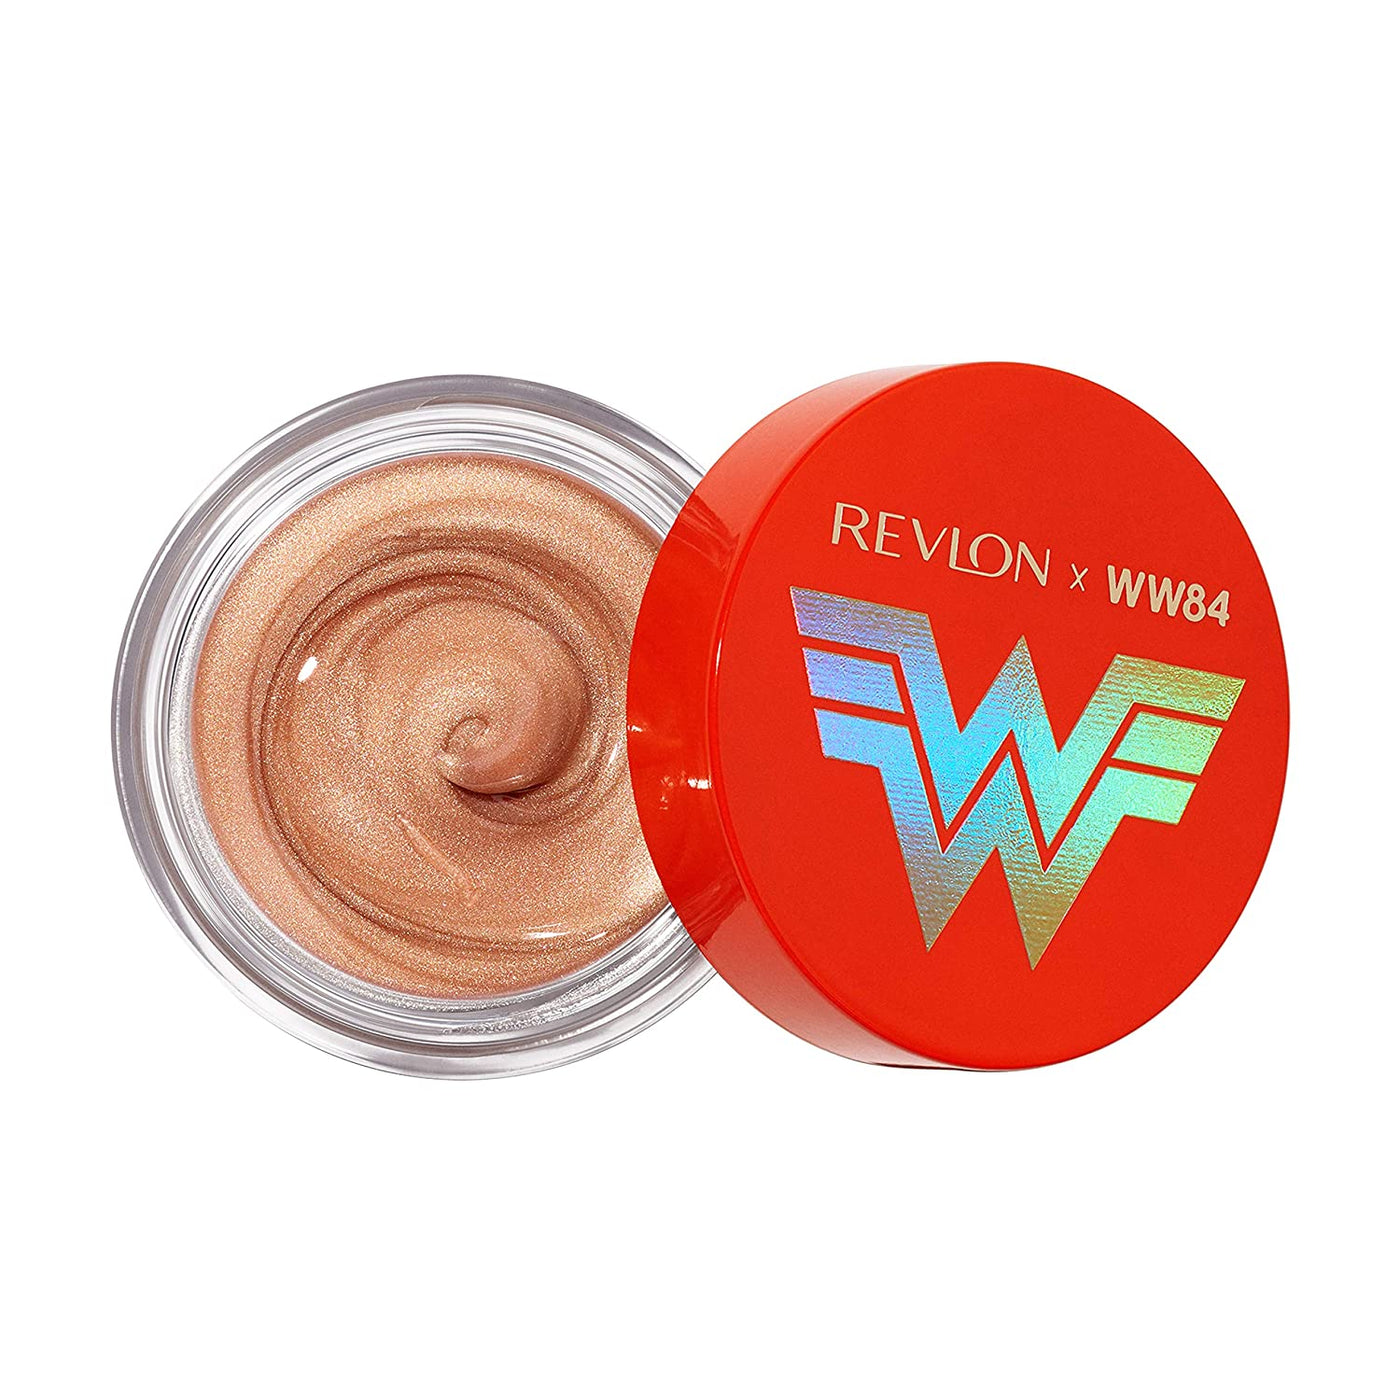 REVLON x WW84 Wonder Woman Liquid Armor Glow Pot, Glossy Eye and Face Jelly Highlighter, in Champagne, 001 Golden Lasso, 0.24 oz Lot of 120